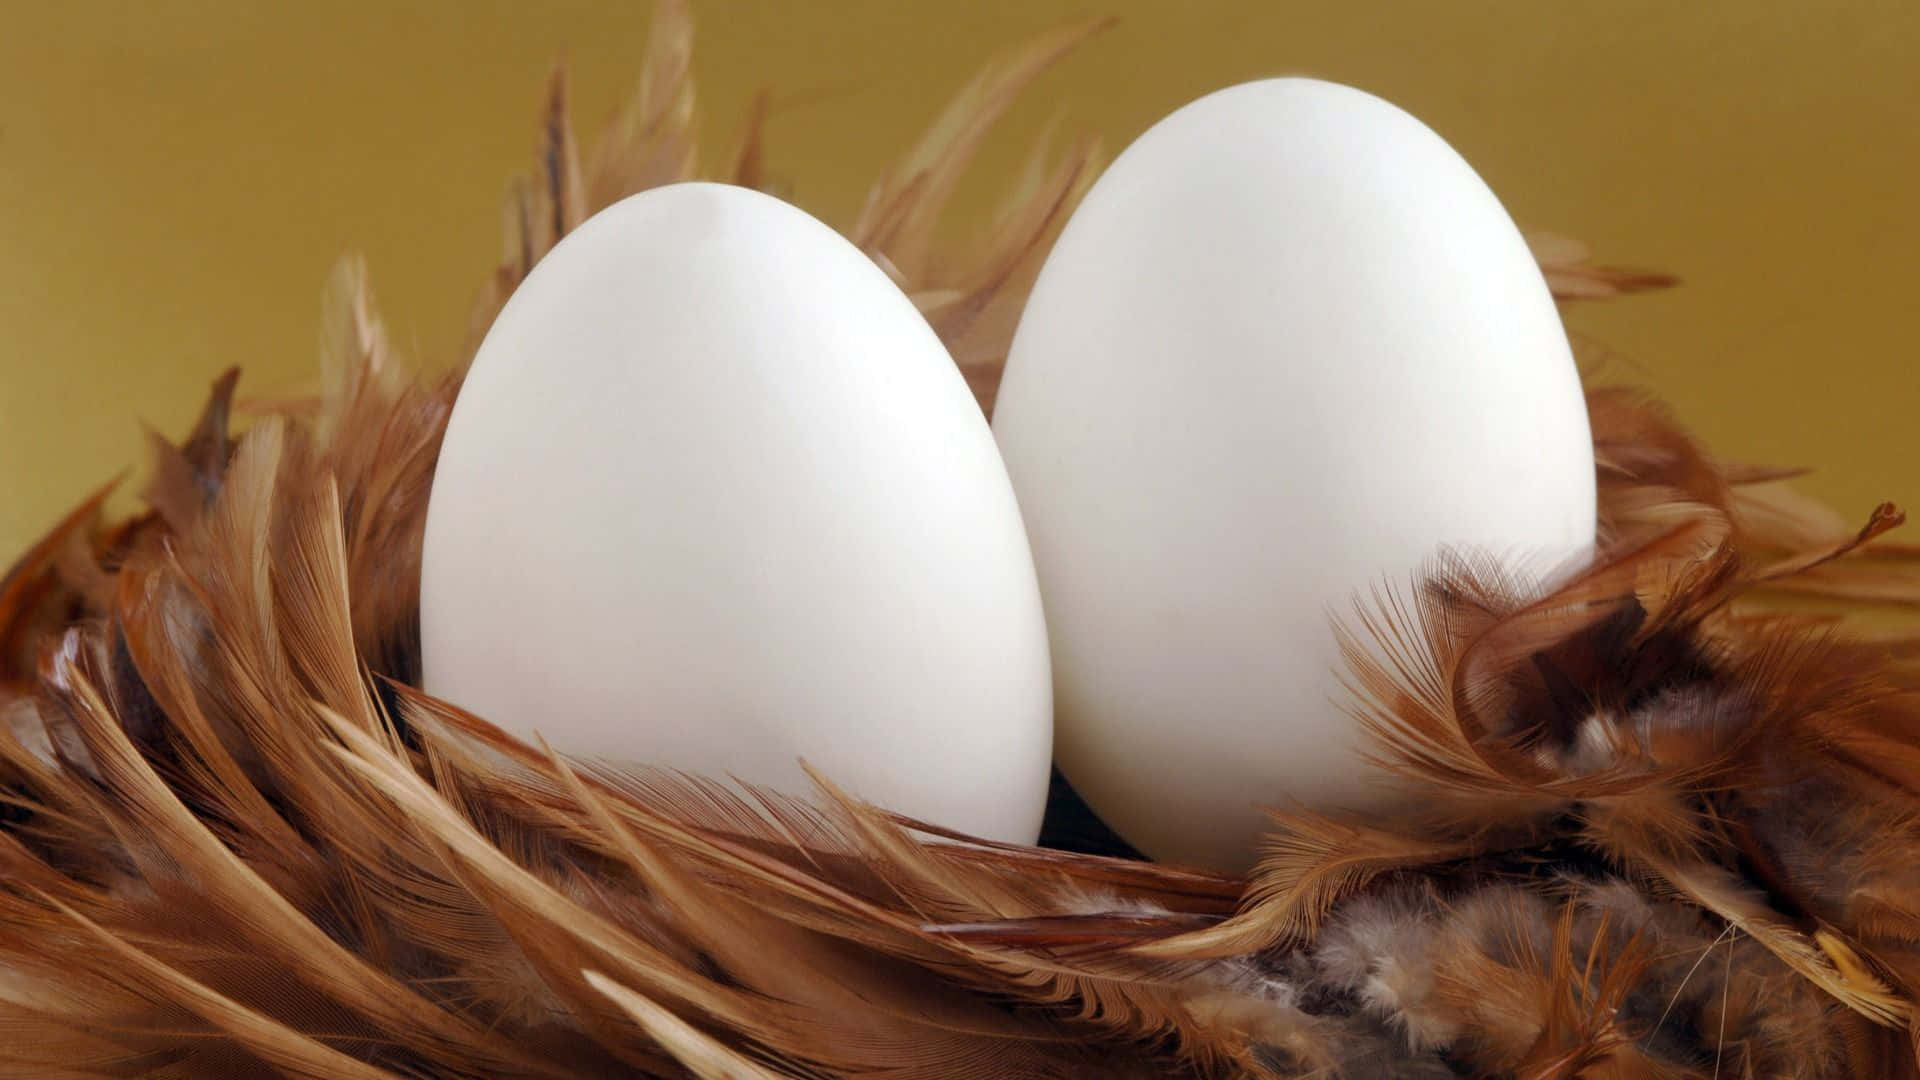 Two White Eggs In A Nest With Brown Feathers